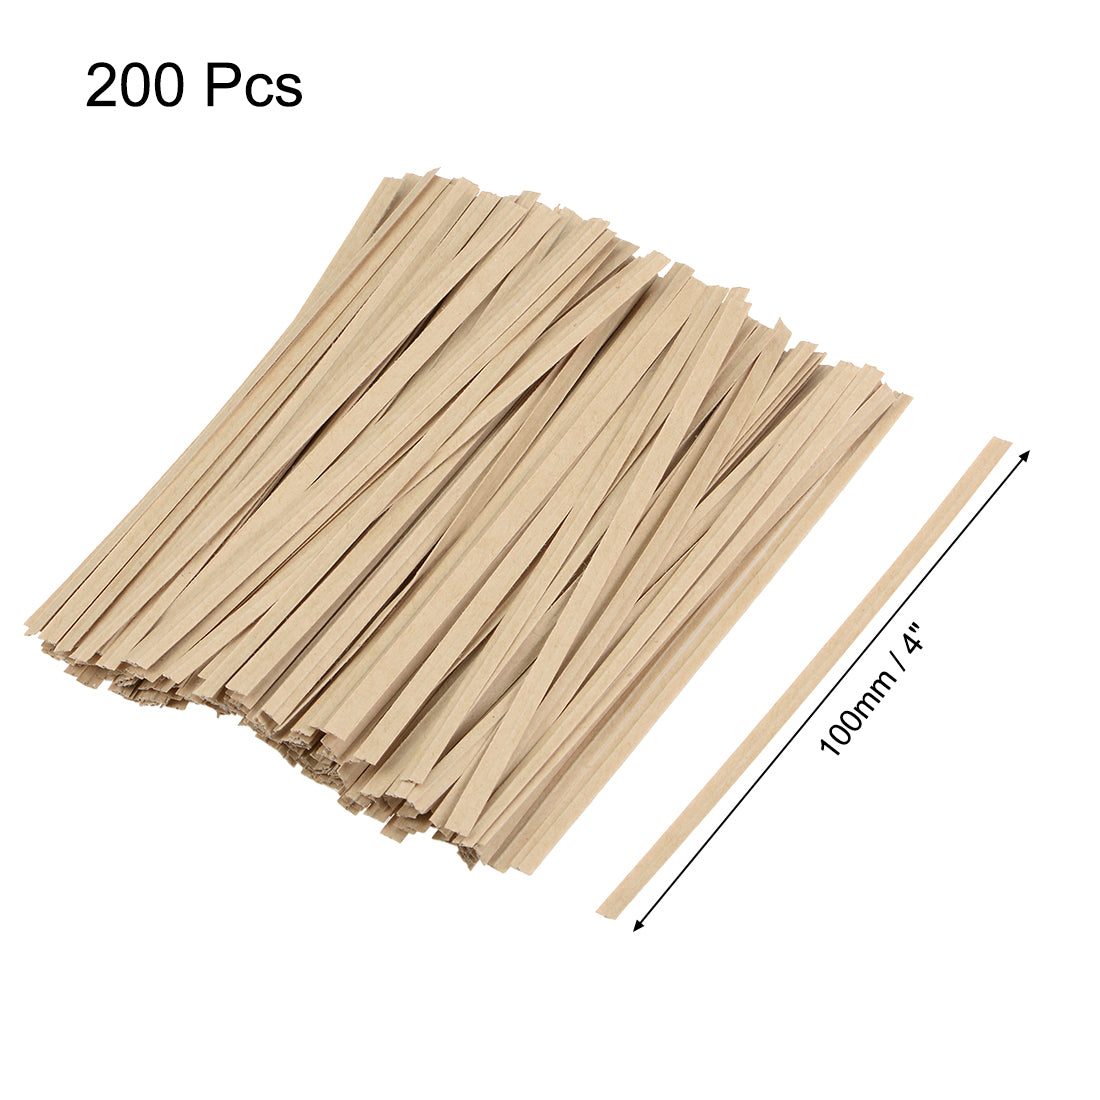 uxcell Uxcell Long Strong Twist Ties 4 Inches Quality  Closure Tie for Tying Gift Bags Art Craft Ties Manage Cords Khaki 200pcs